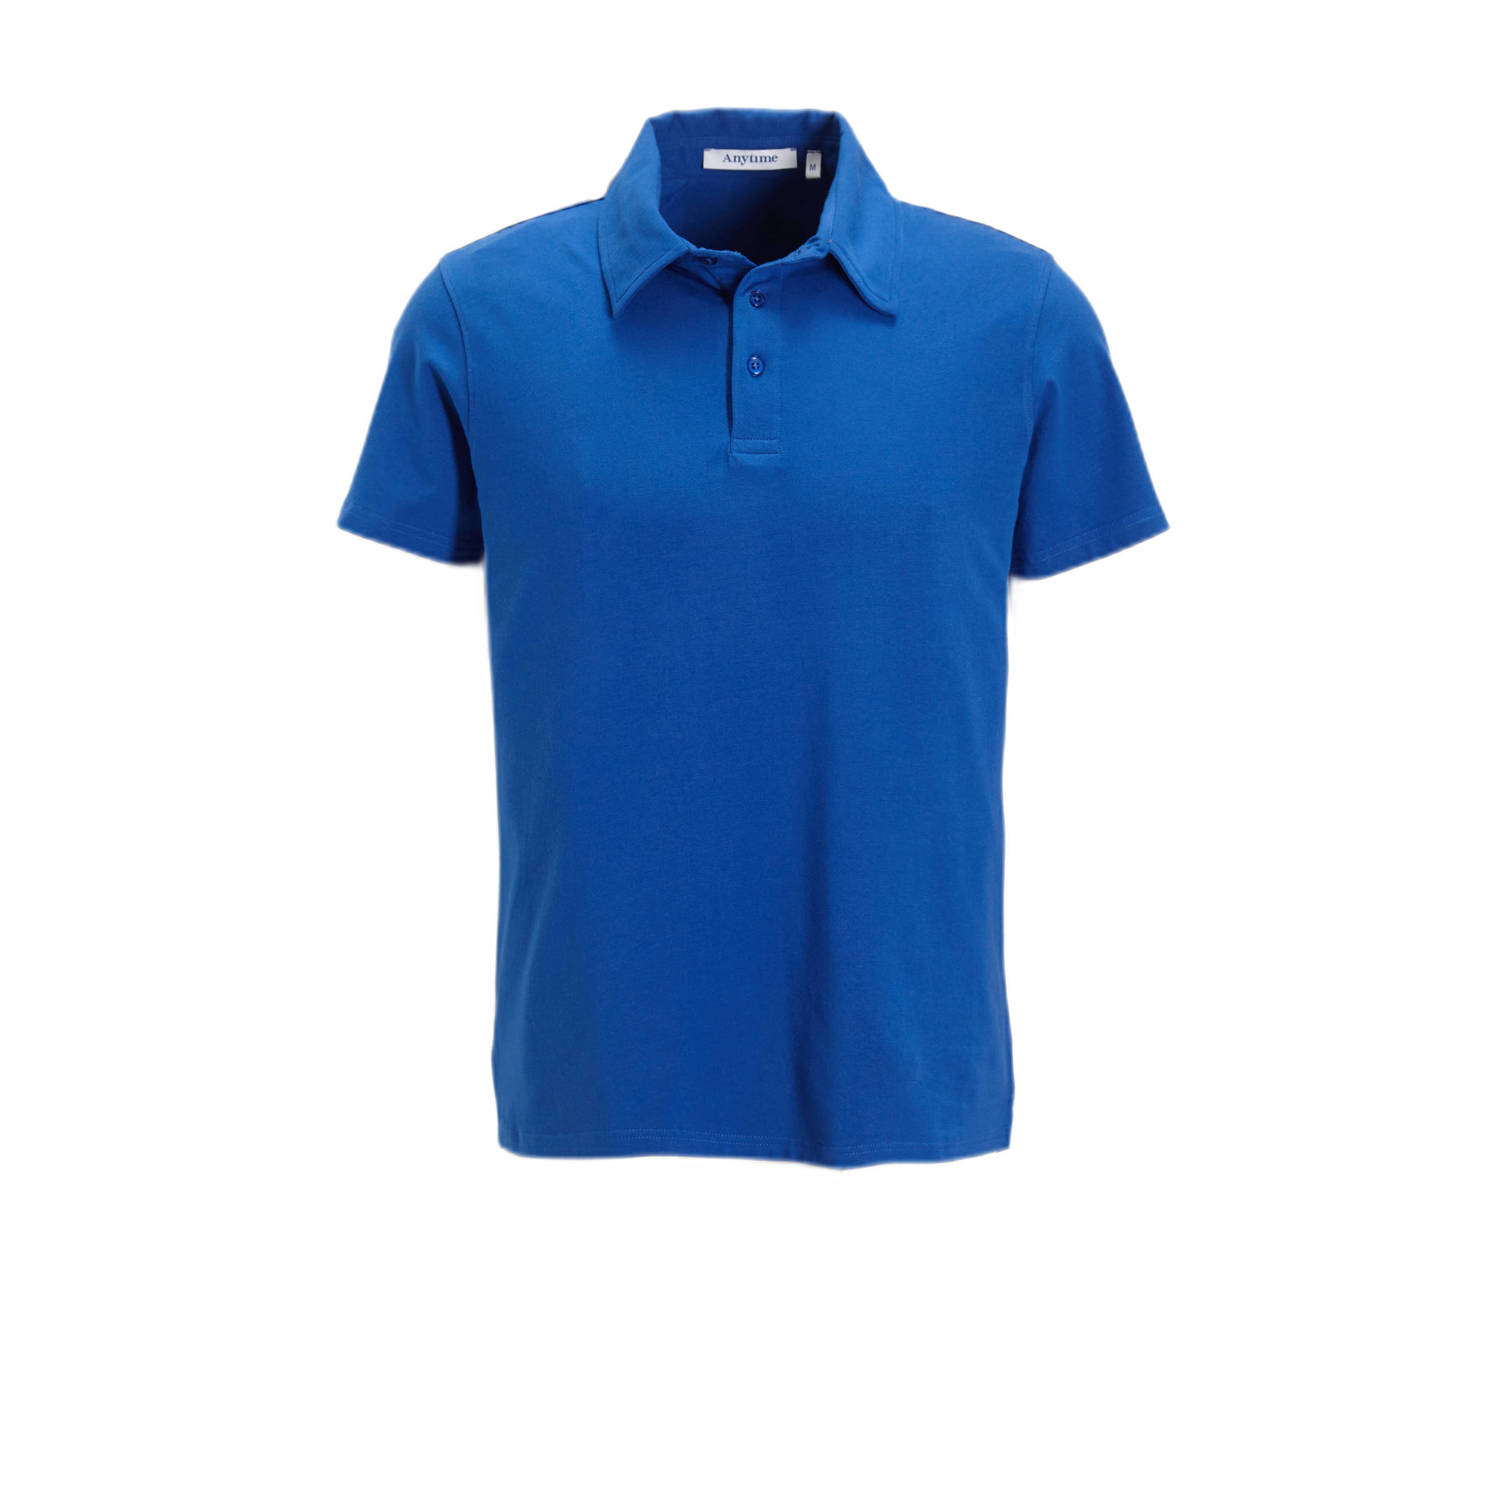 Anytime slim jersey polo blauw